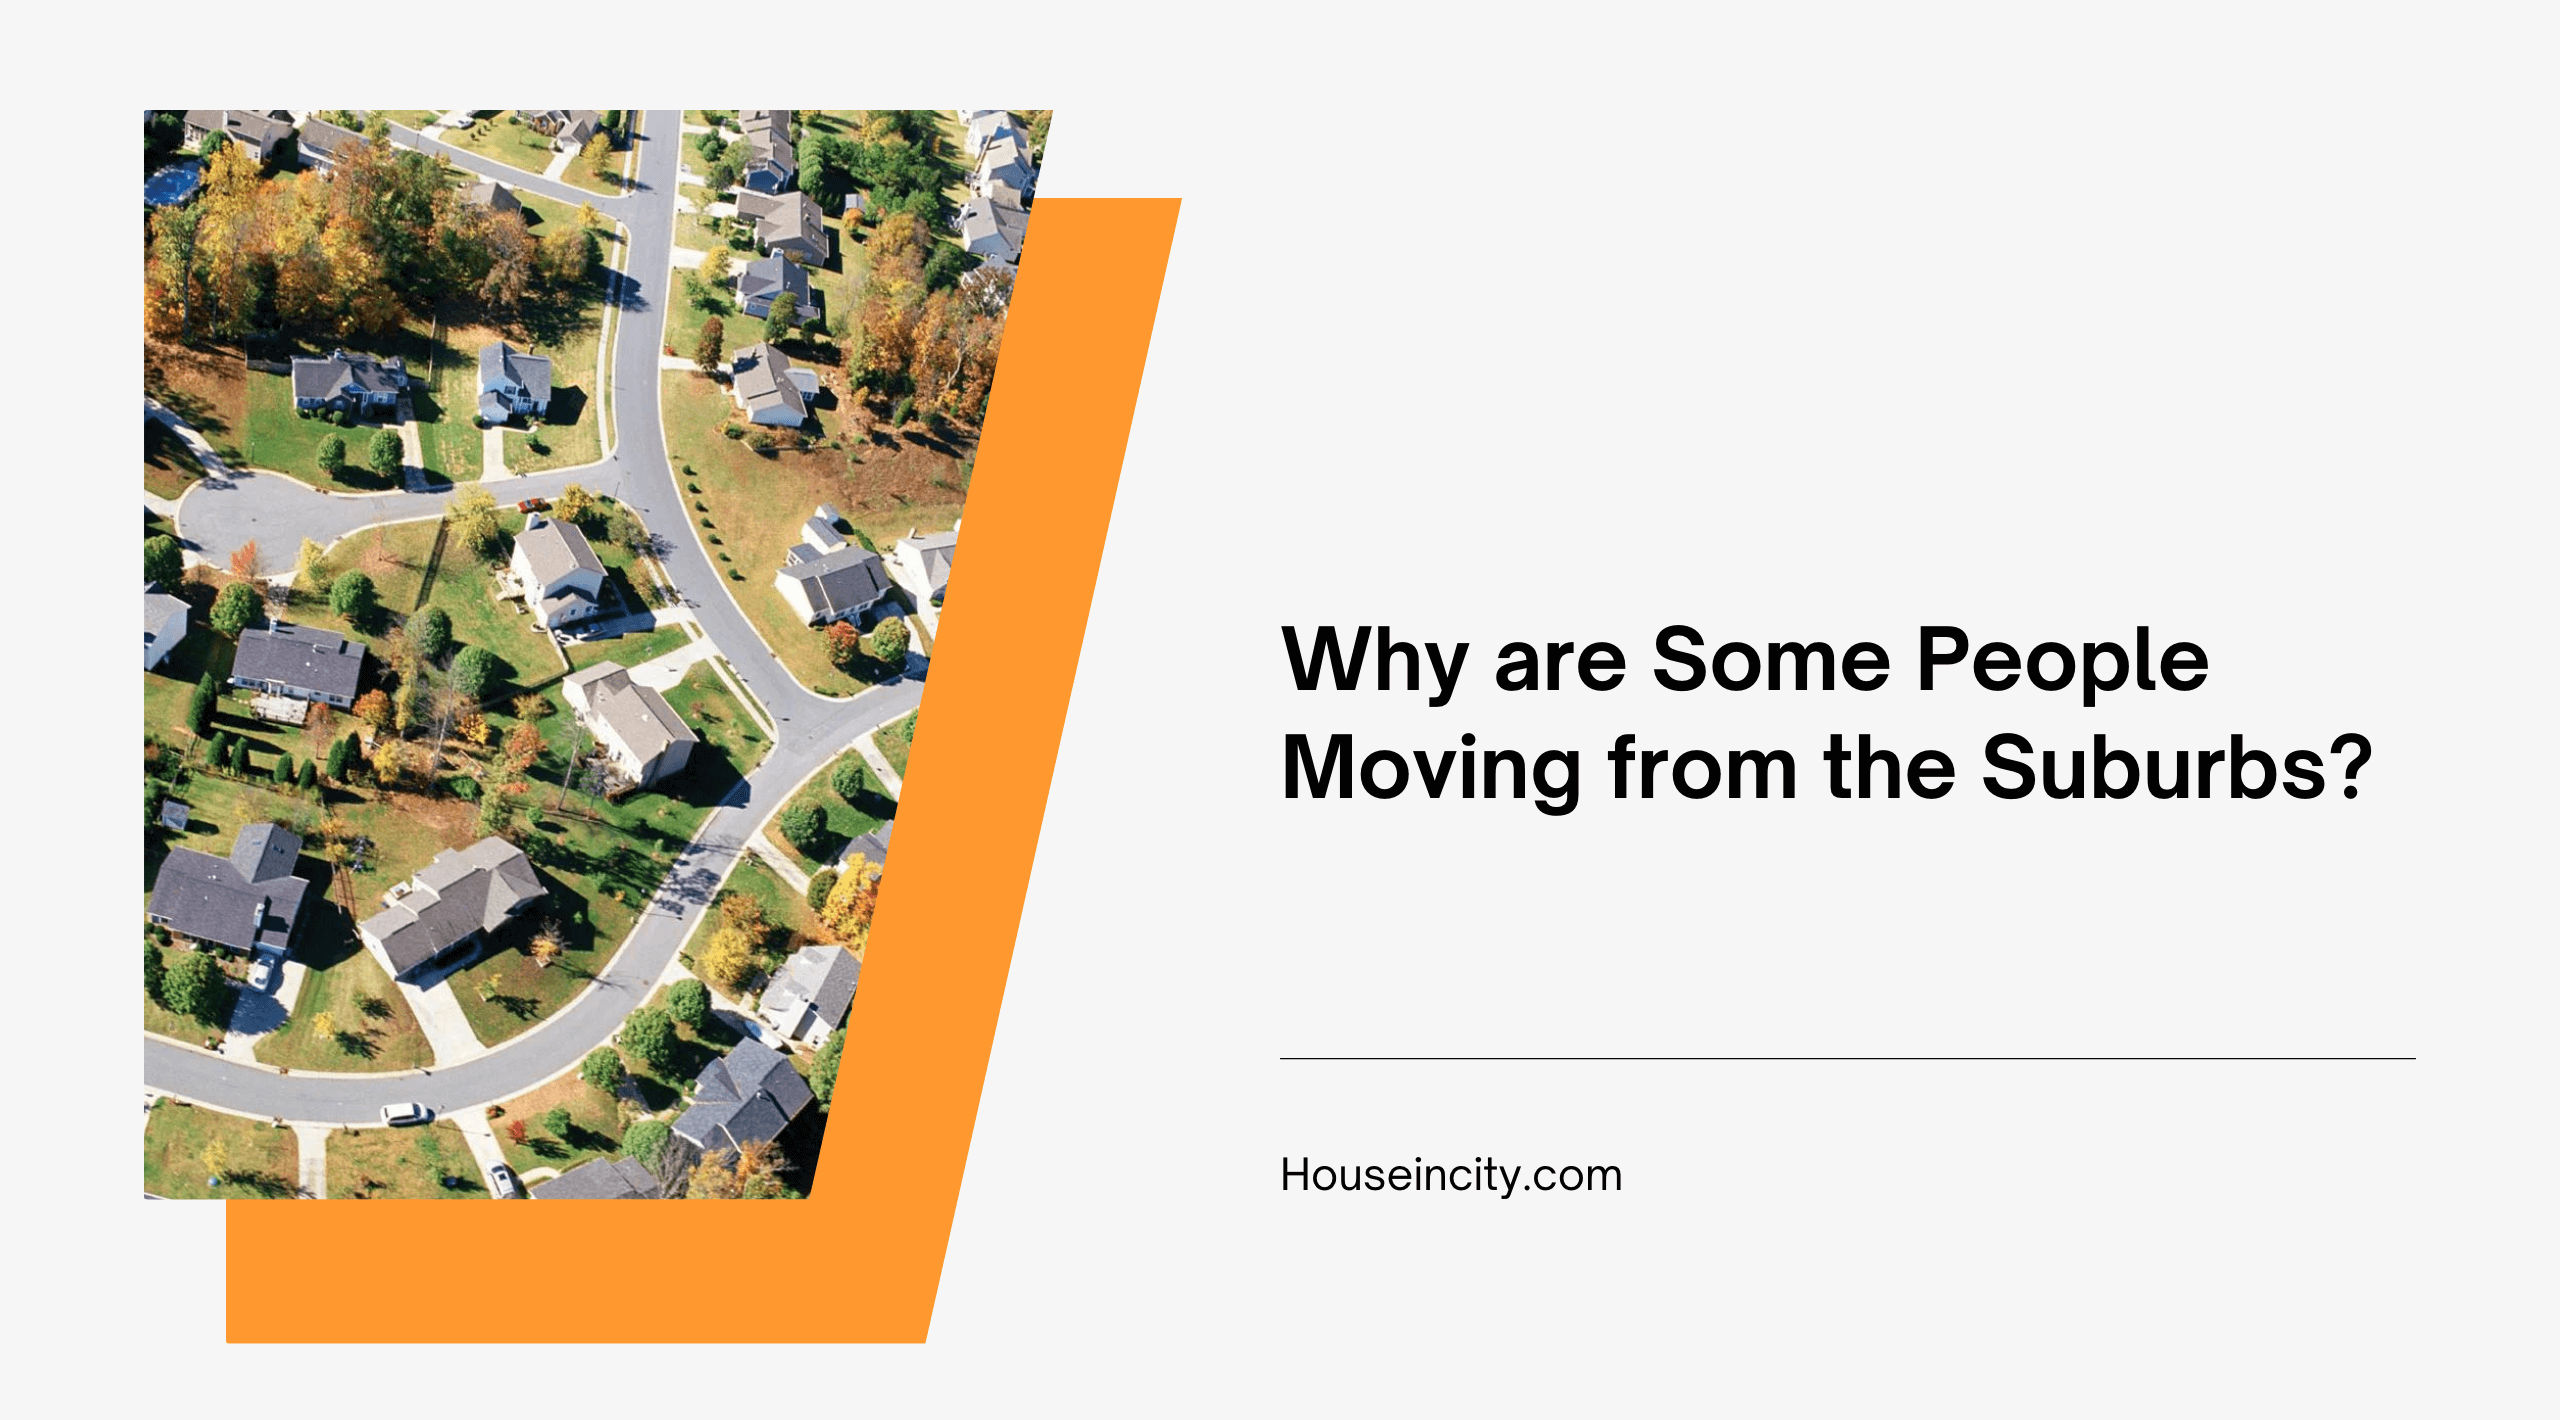 Why are Some People Moving from the Suburbs?